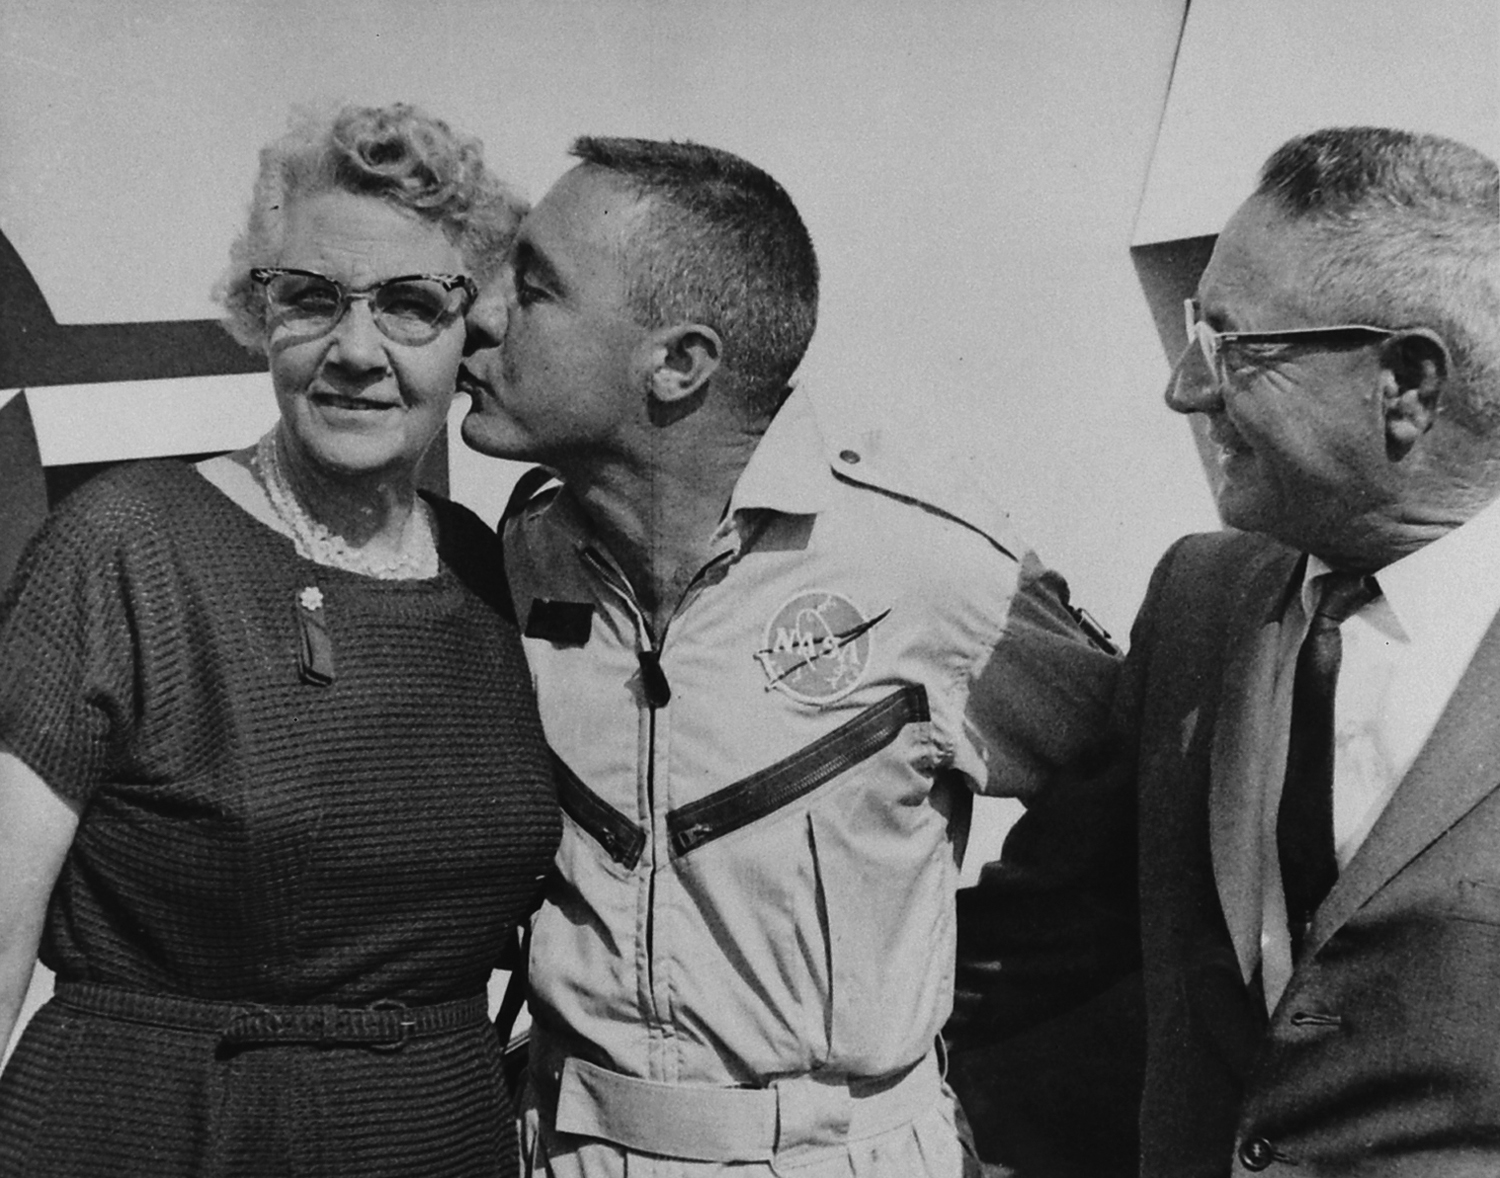 Home a hero after his successful 1965 mission in Gemini 3, [Gus Grissom] greeted his parents who came from Mitchell, Ind. for the flight.